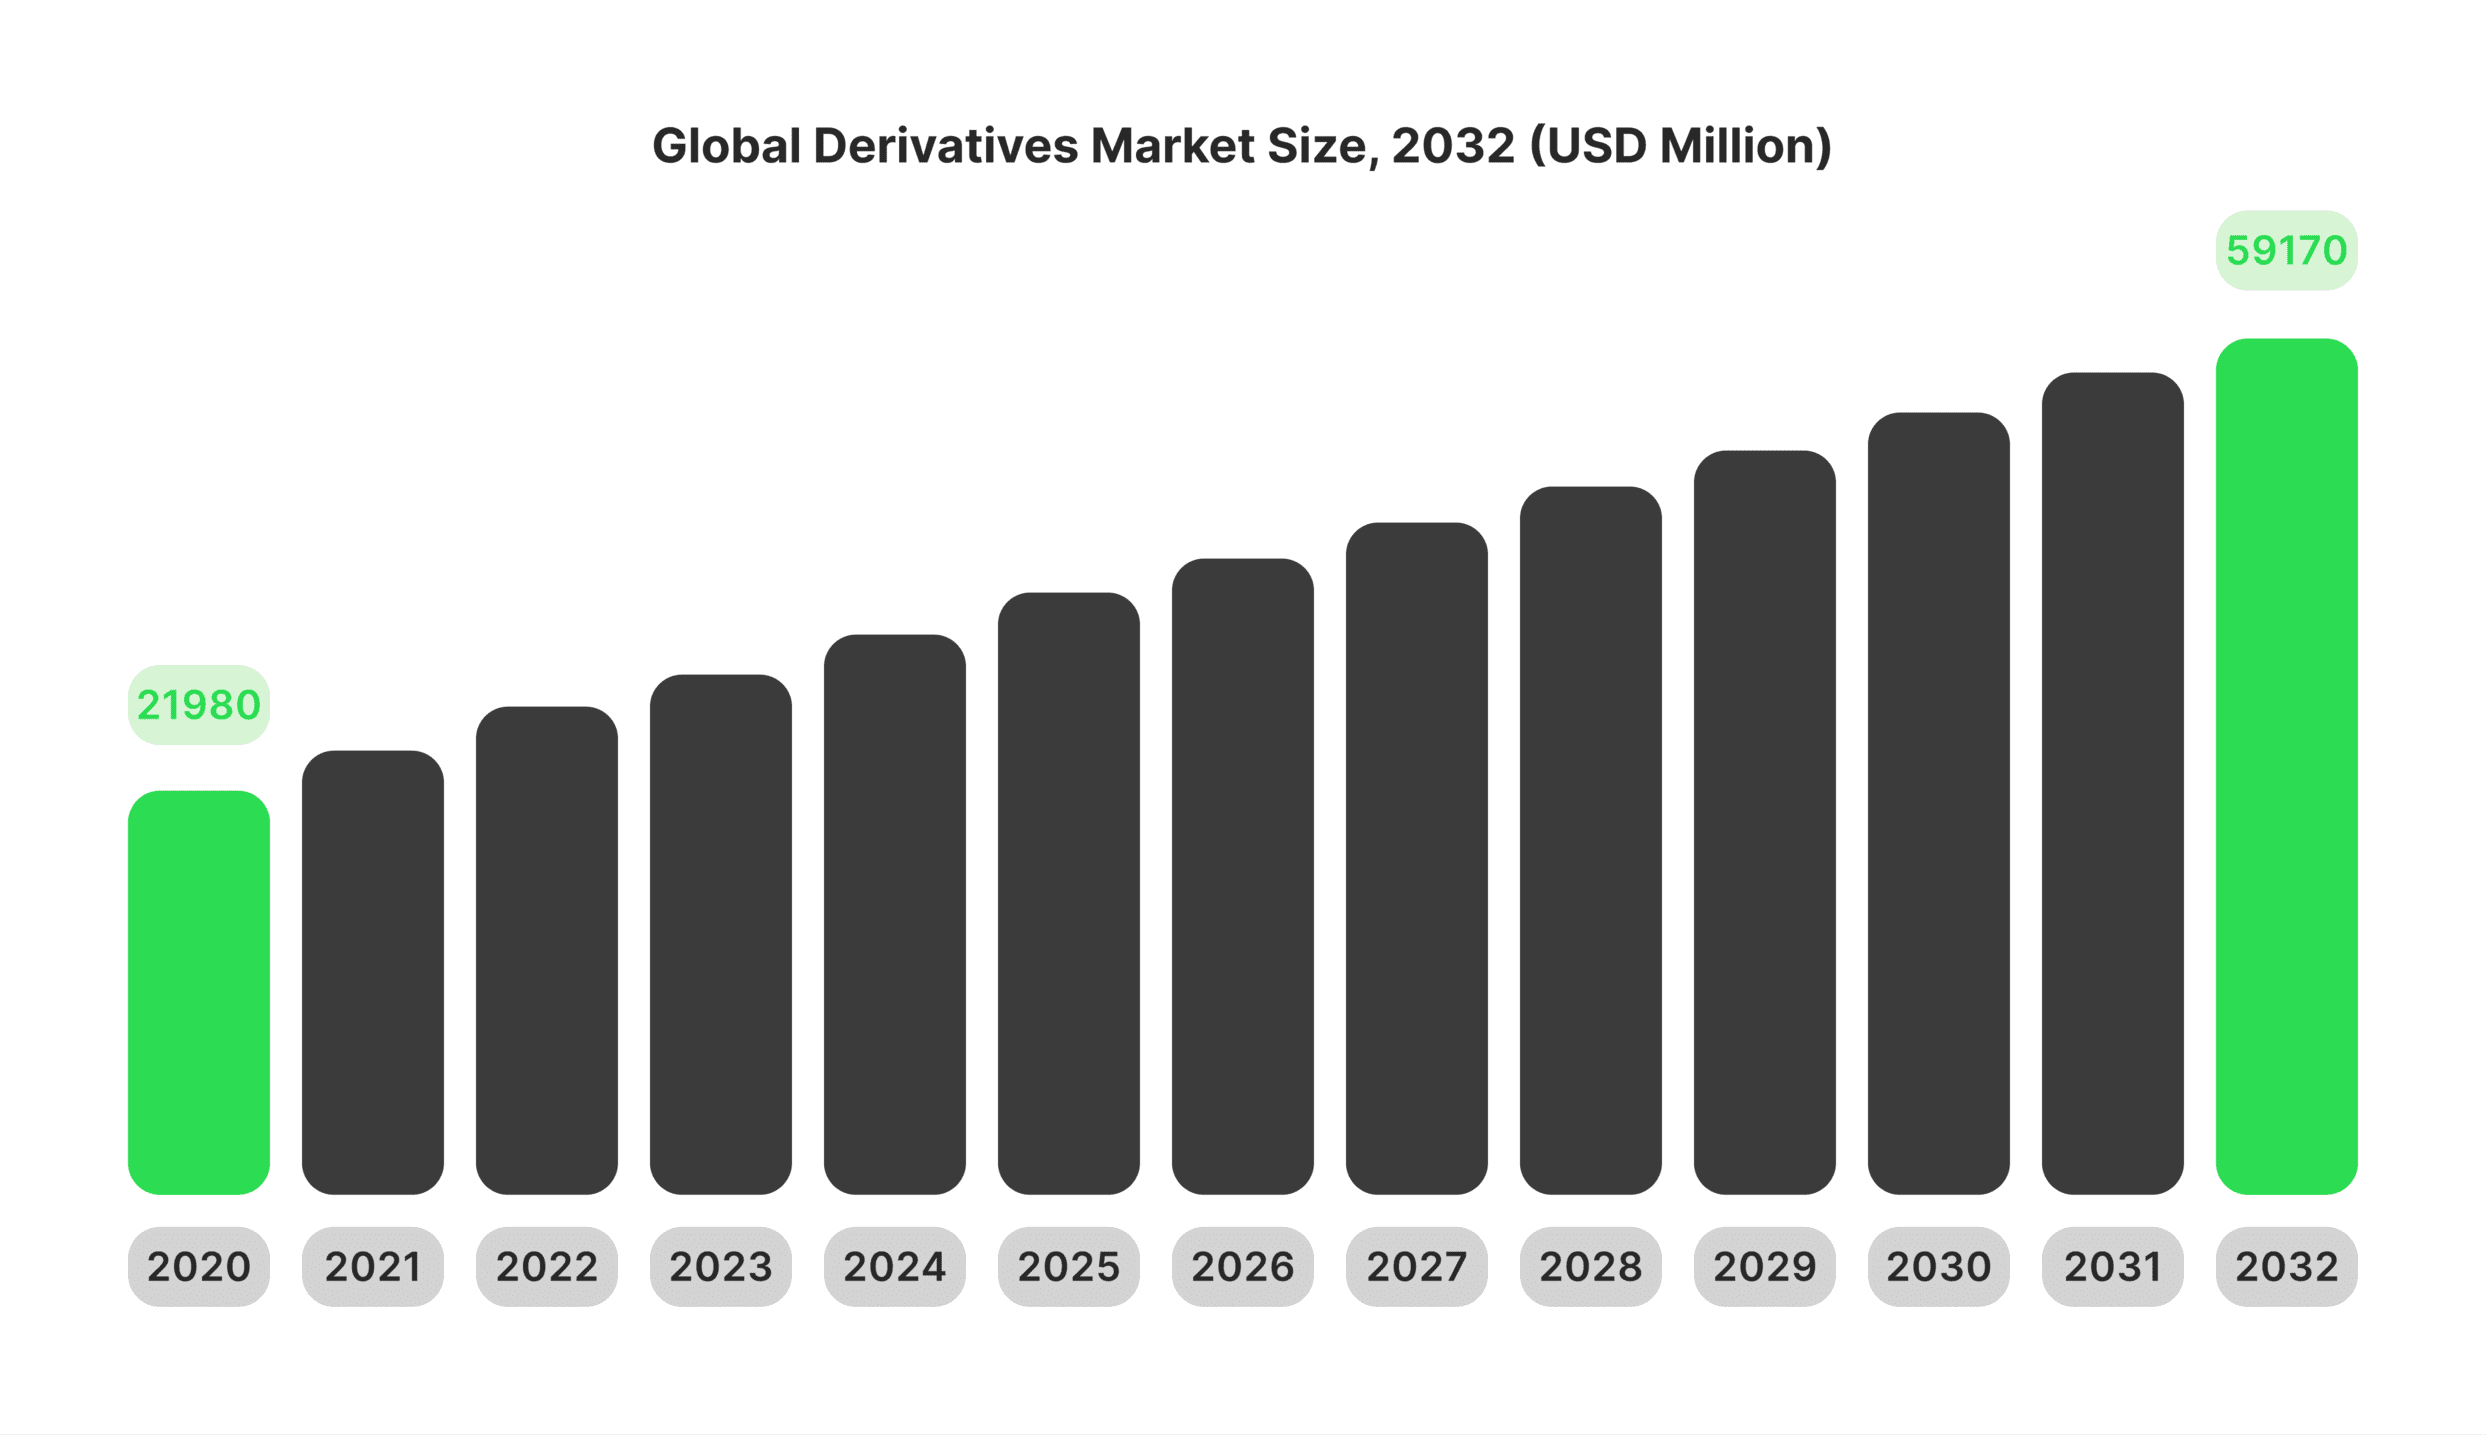 The future of derivatives trading